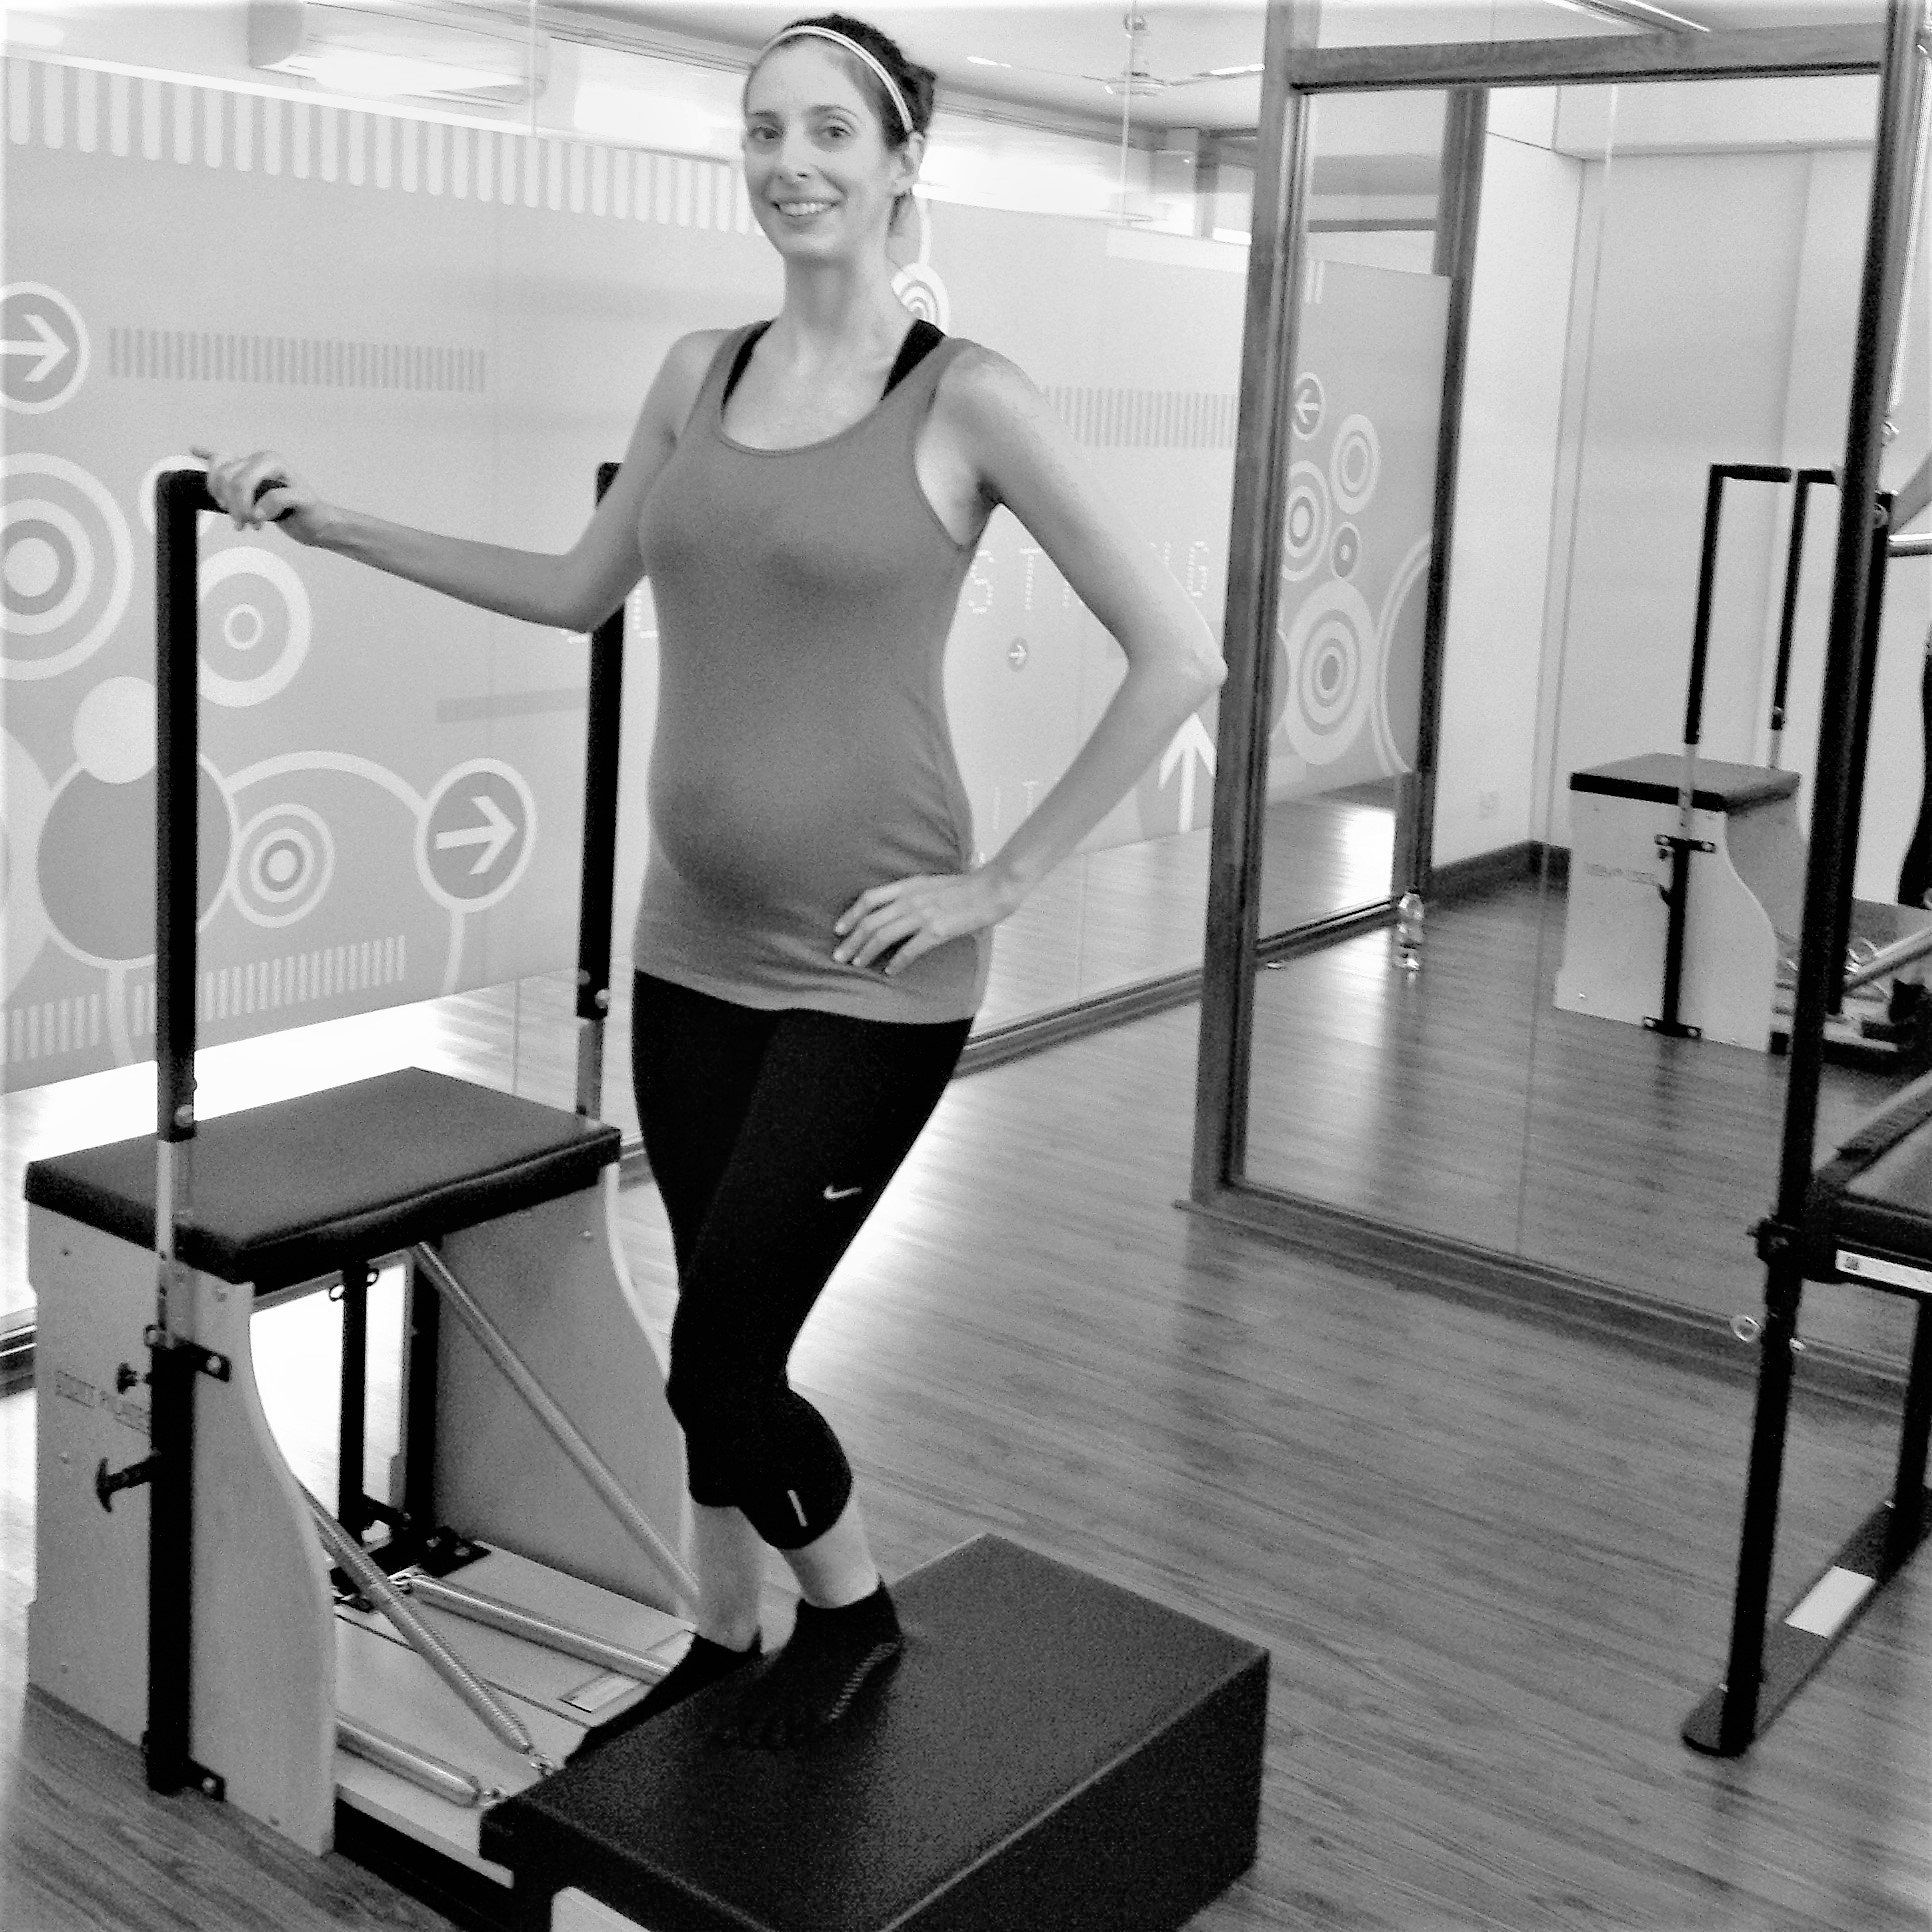 Pregnancy workouts for core, breathing, posture at The Zone Pilates Studio Bangalore